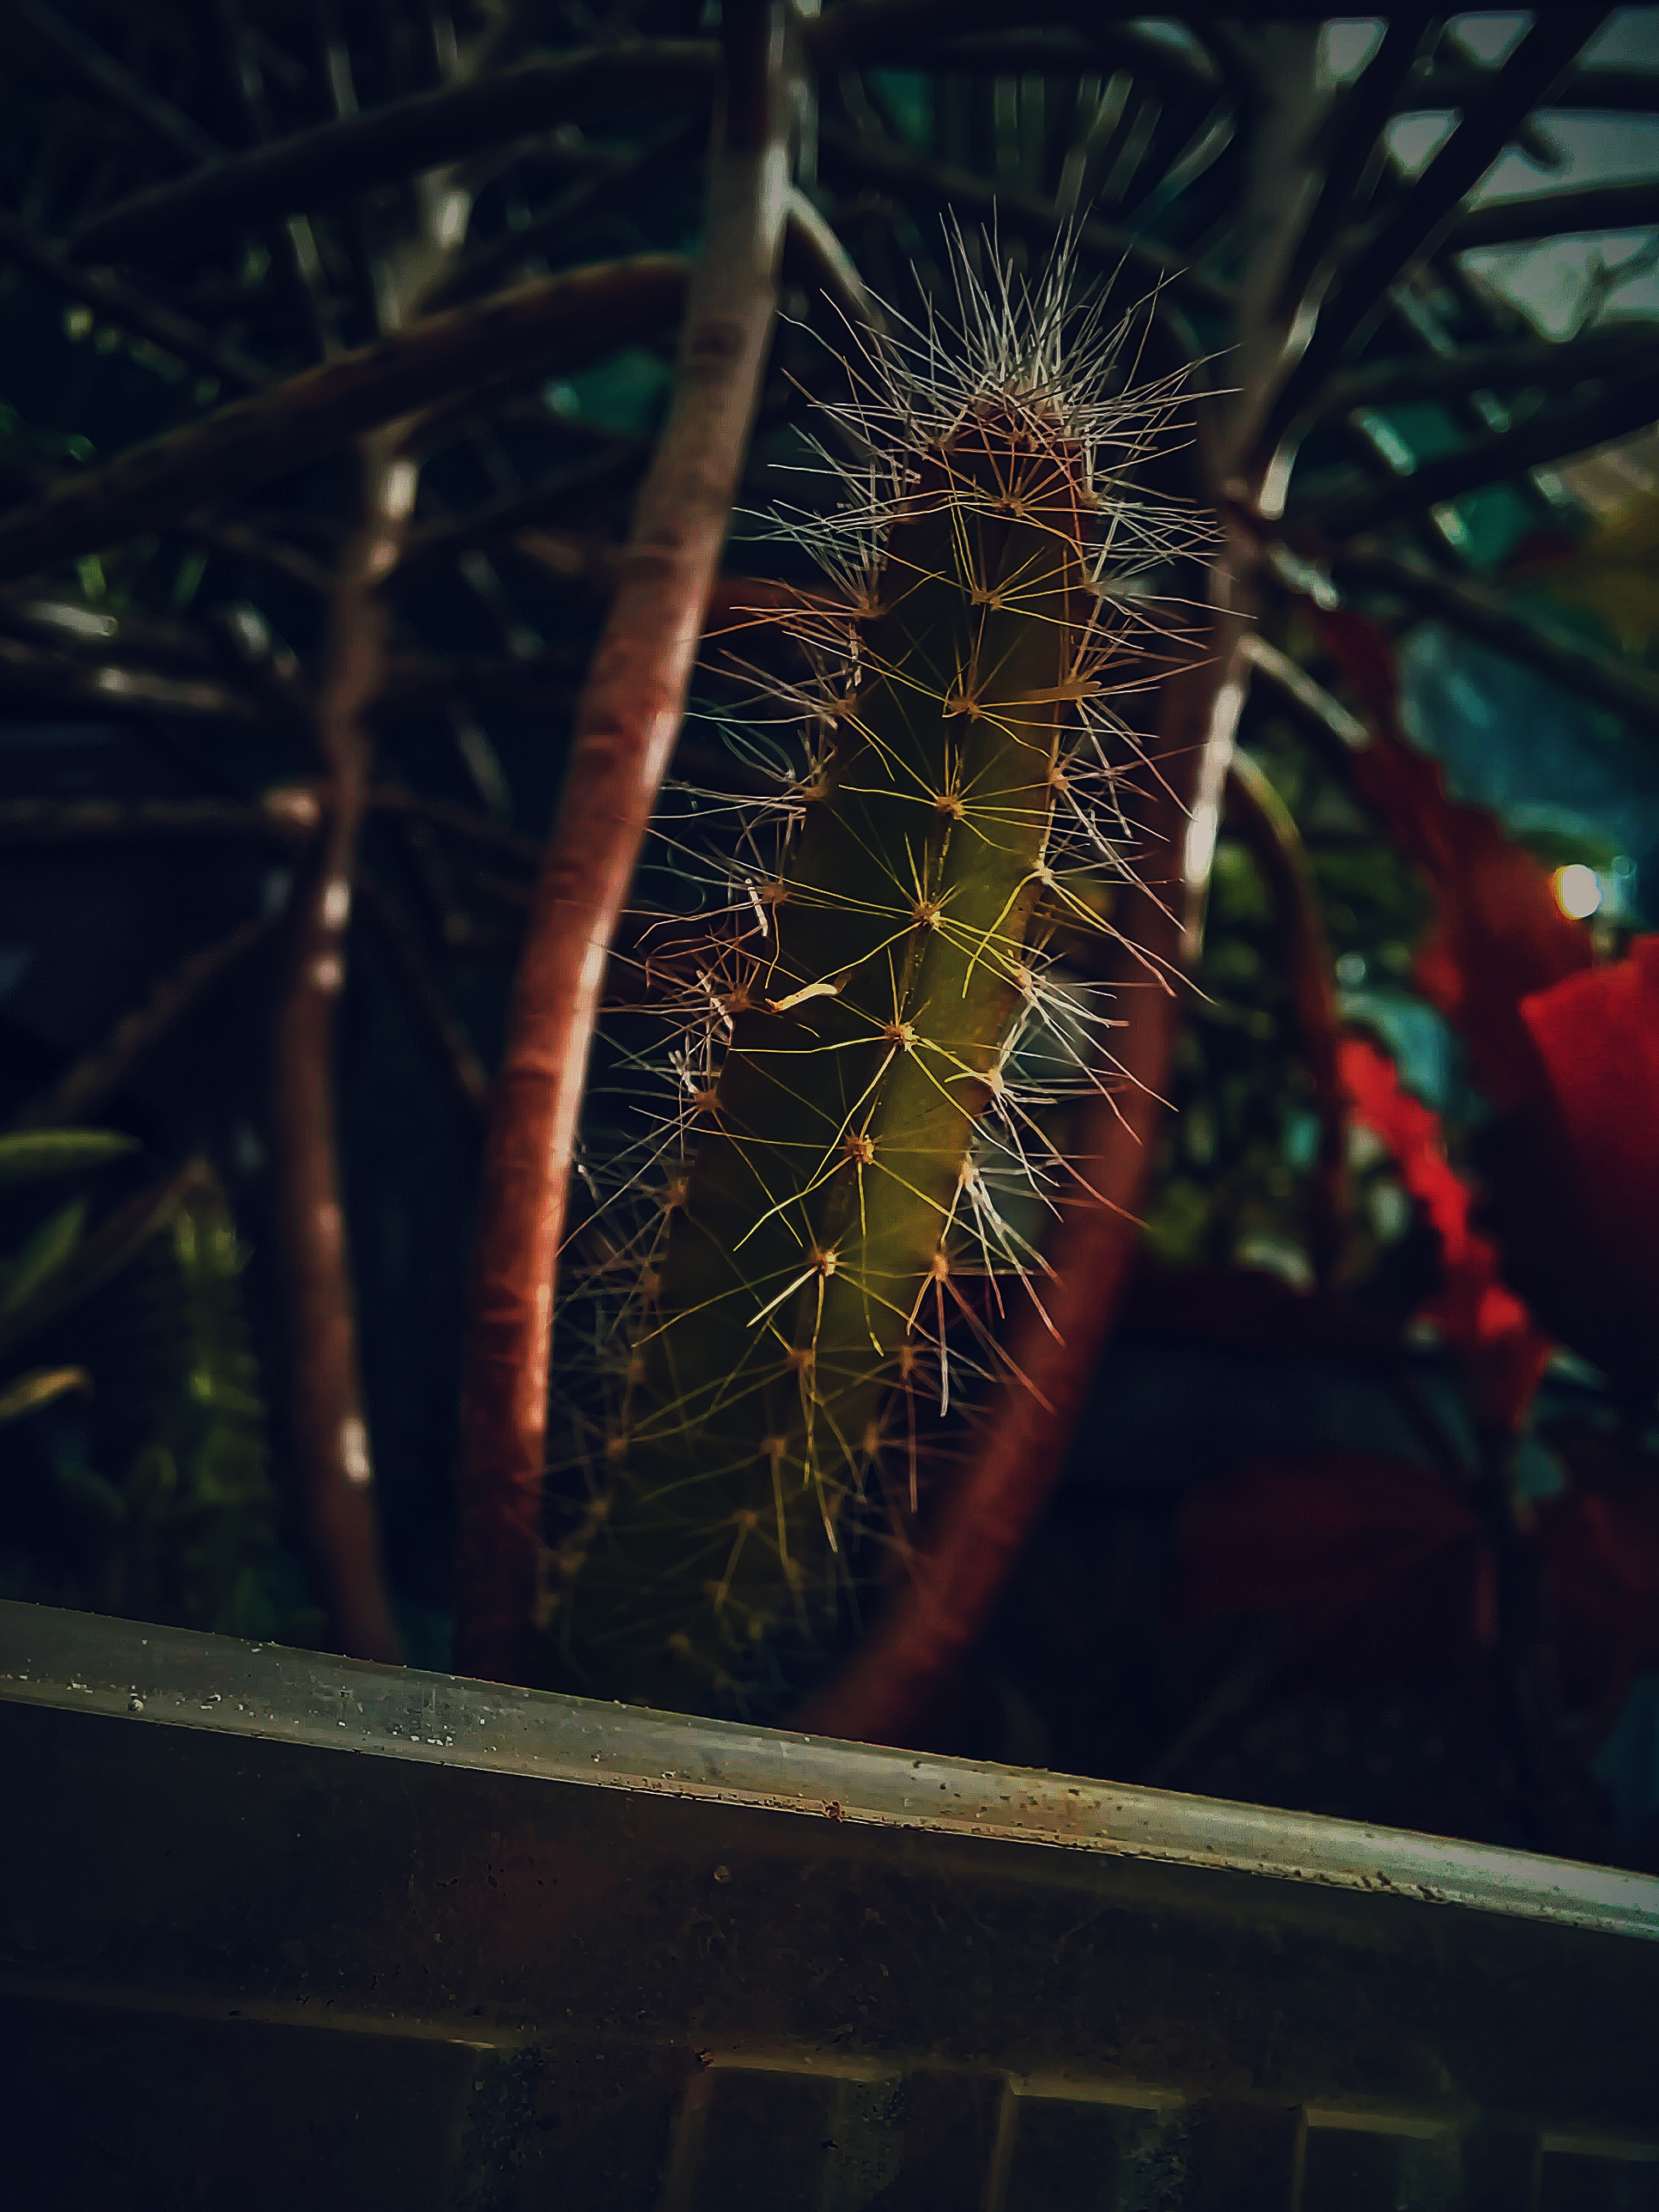 A cactus with thorns on it by Hermano006